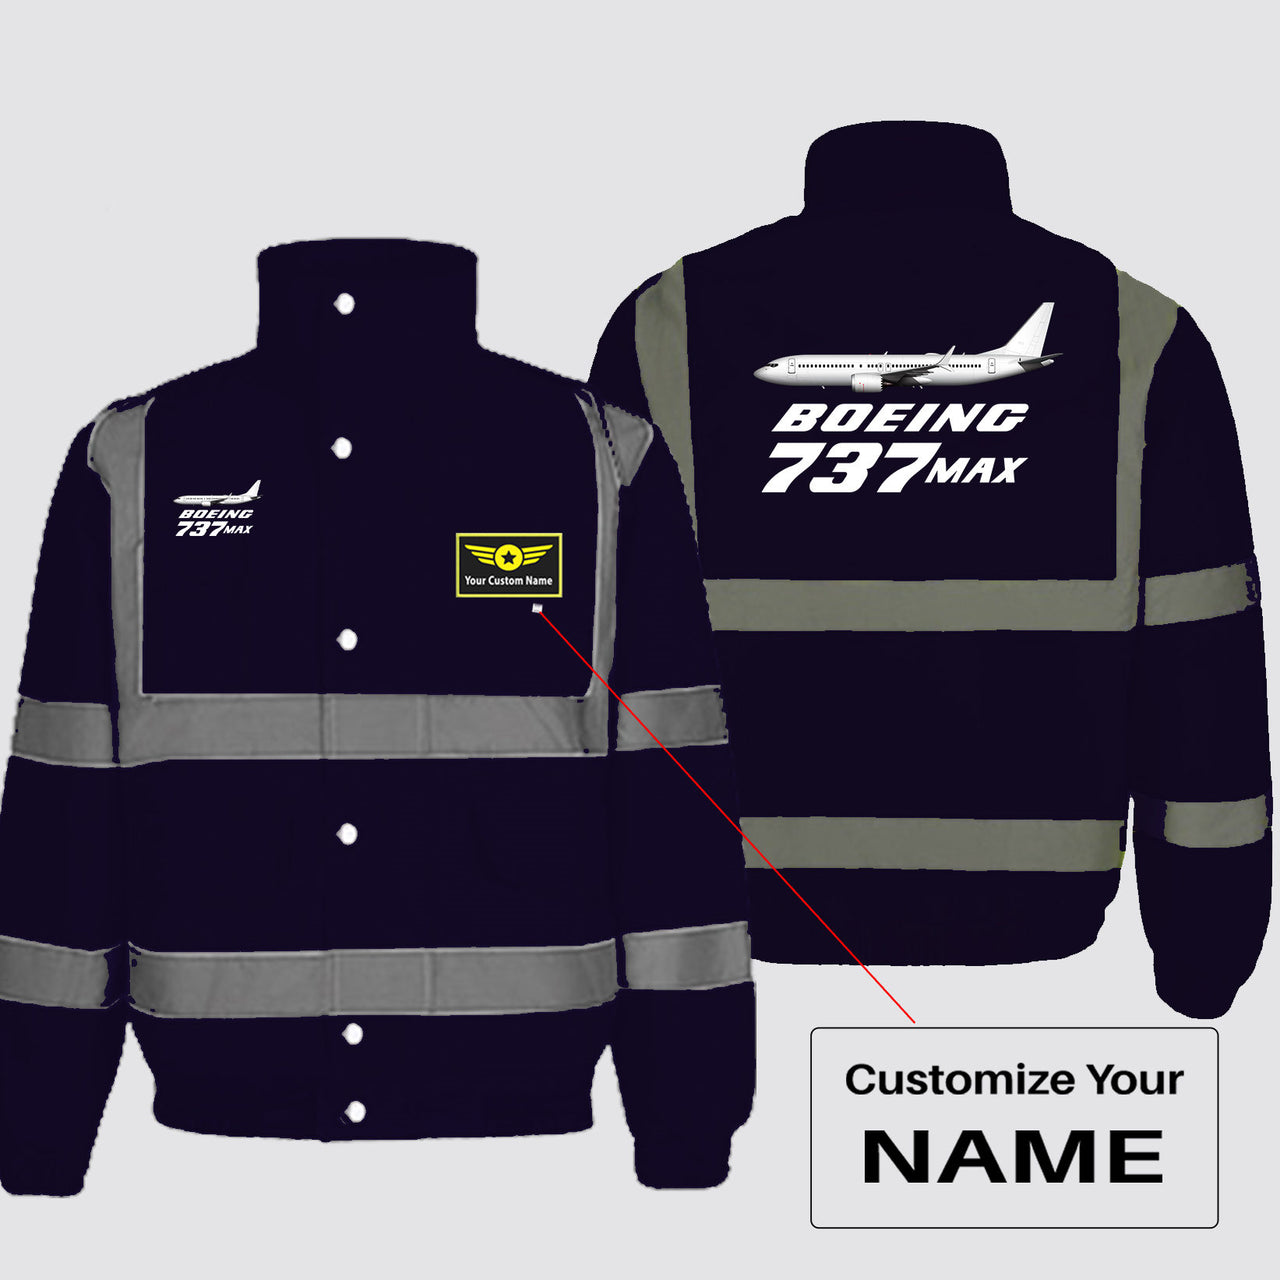 The Boeing 737Max Designed Reflective Winter Jackets